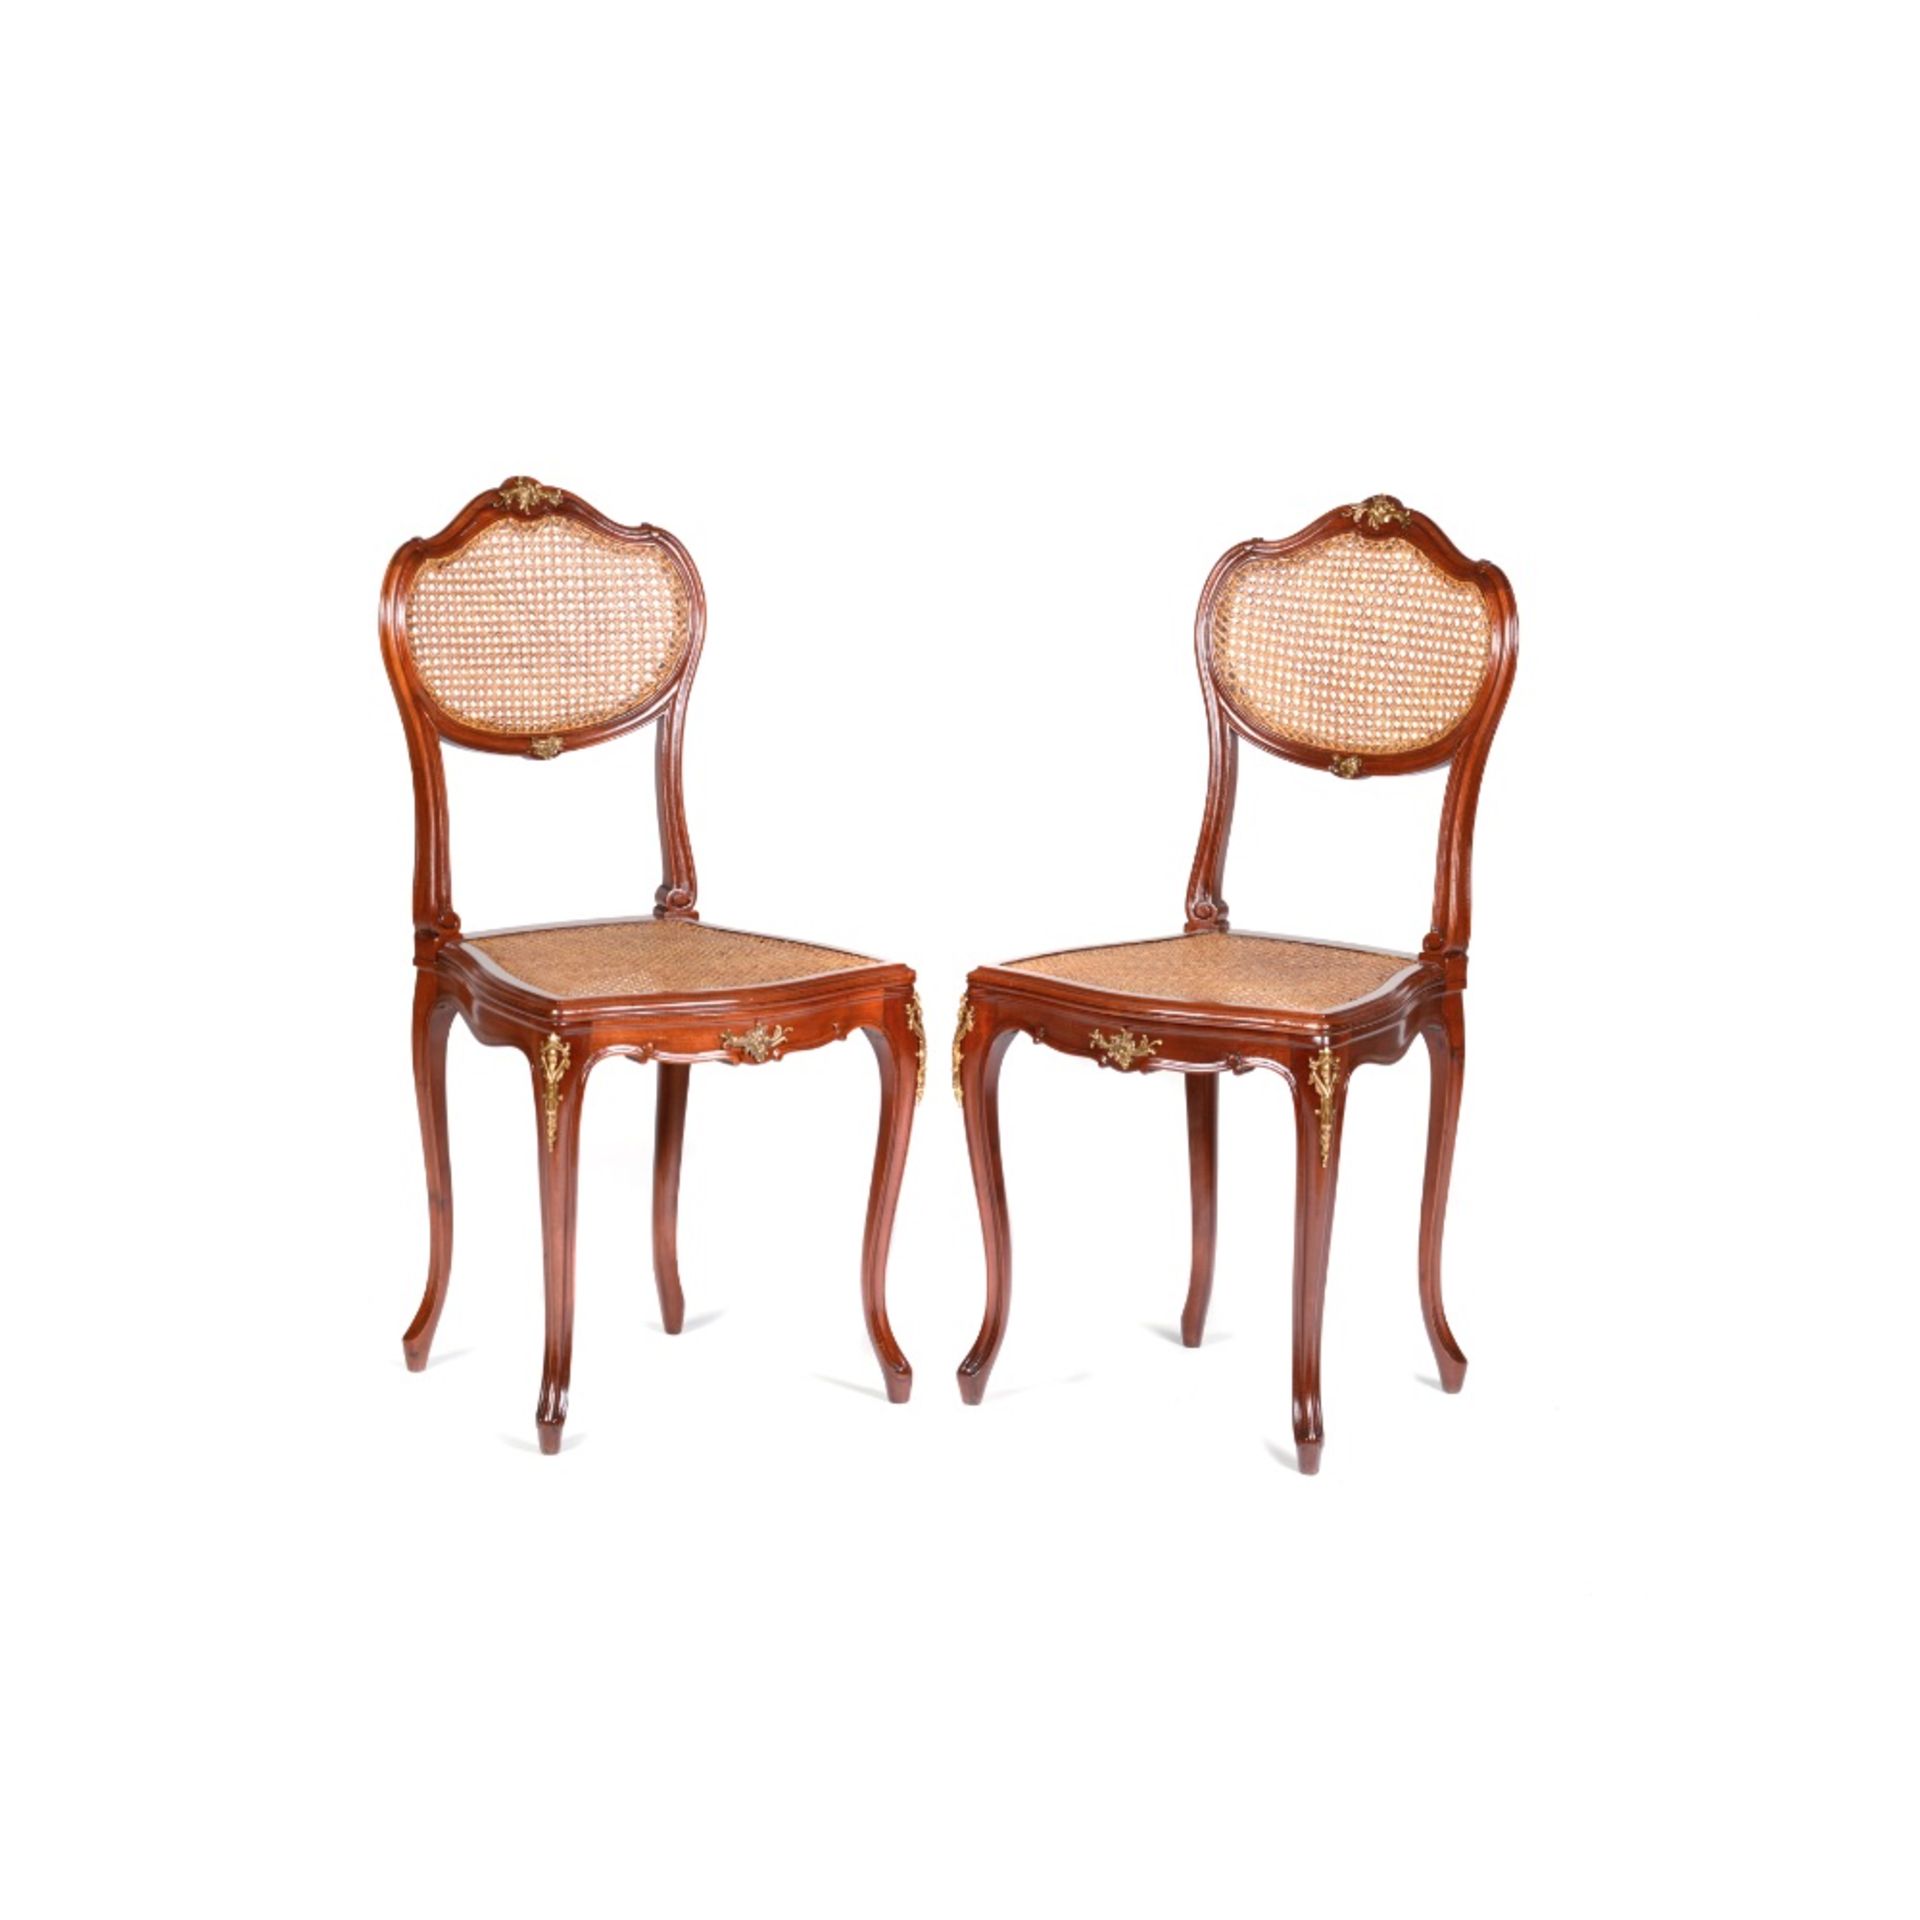 A pair of Louis XV style chairs